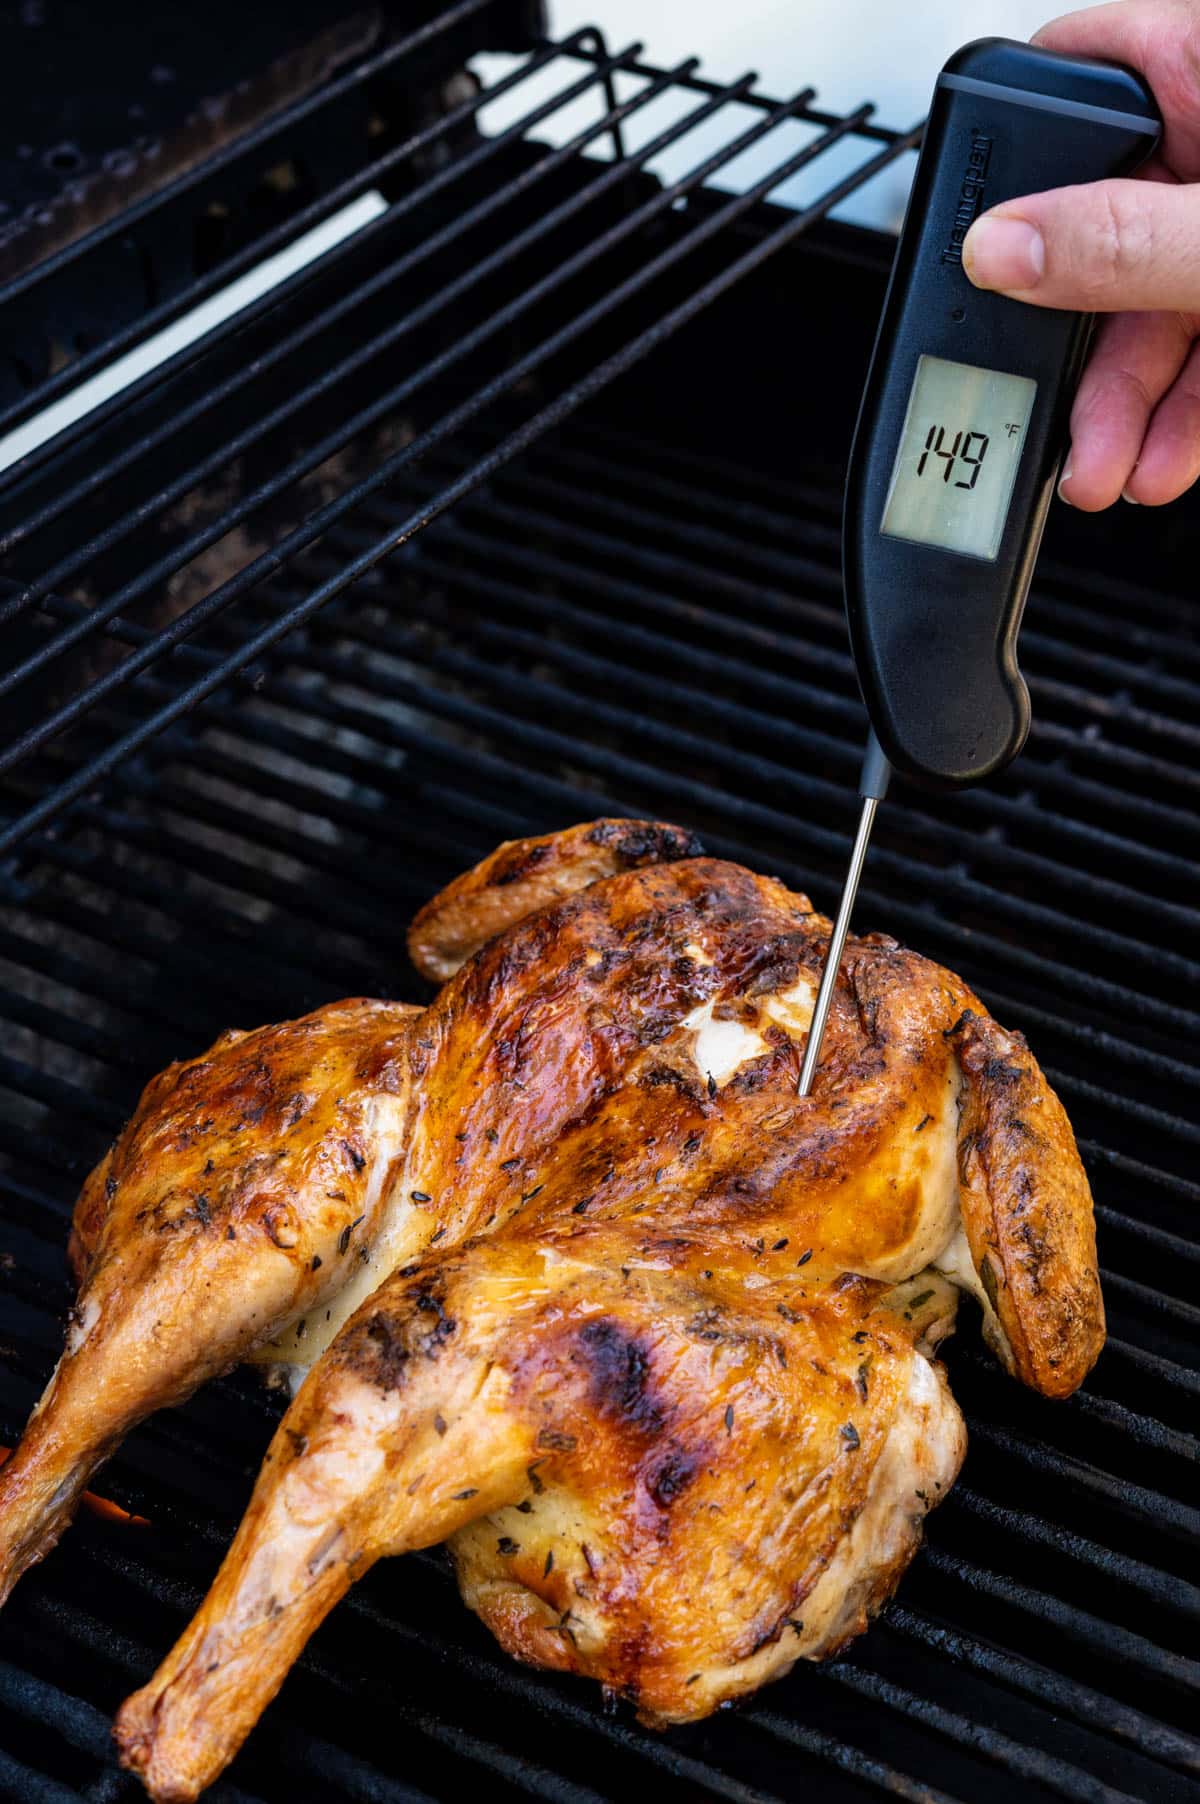 I am taking the internal temperature of the meat with an instant-read thermometer.